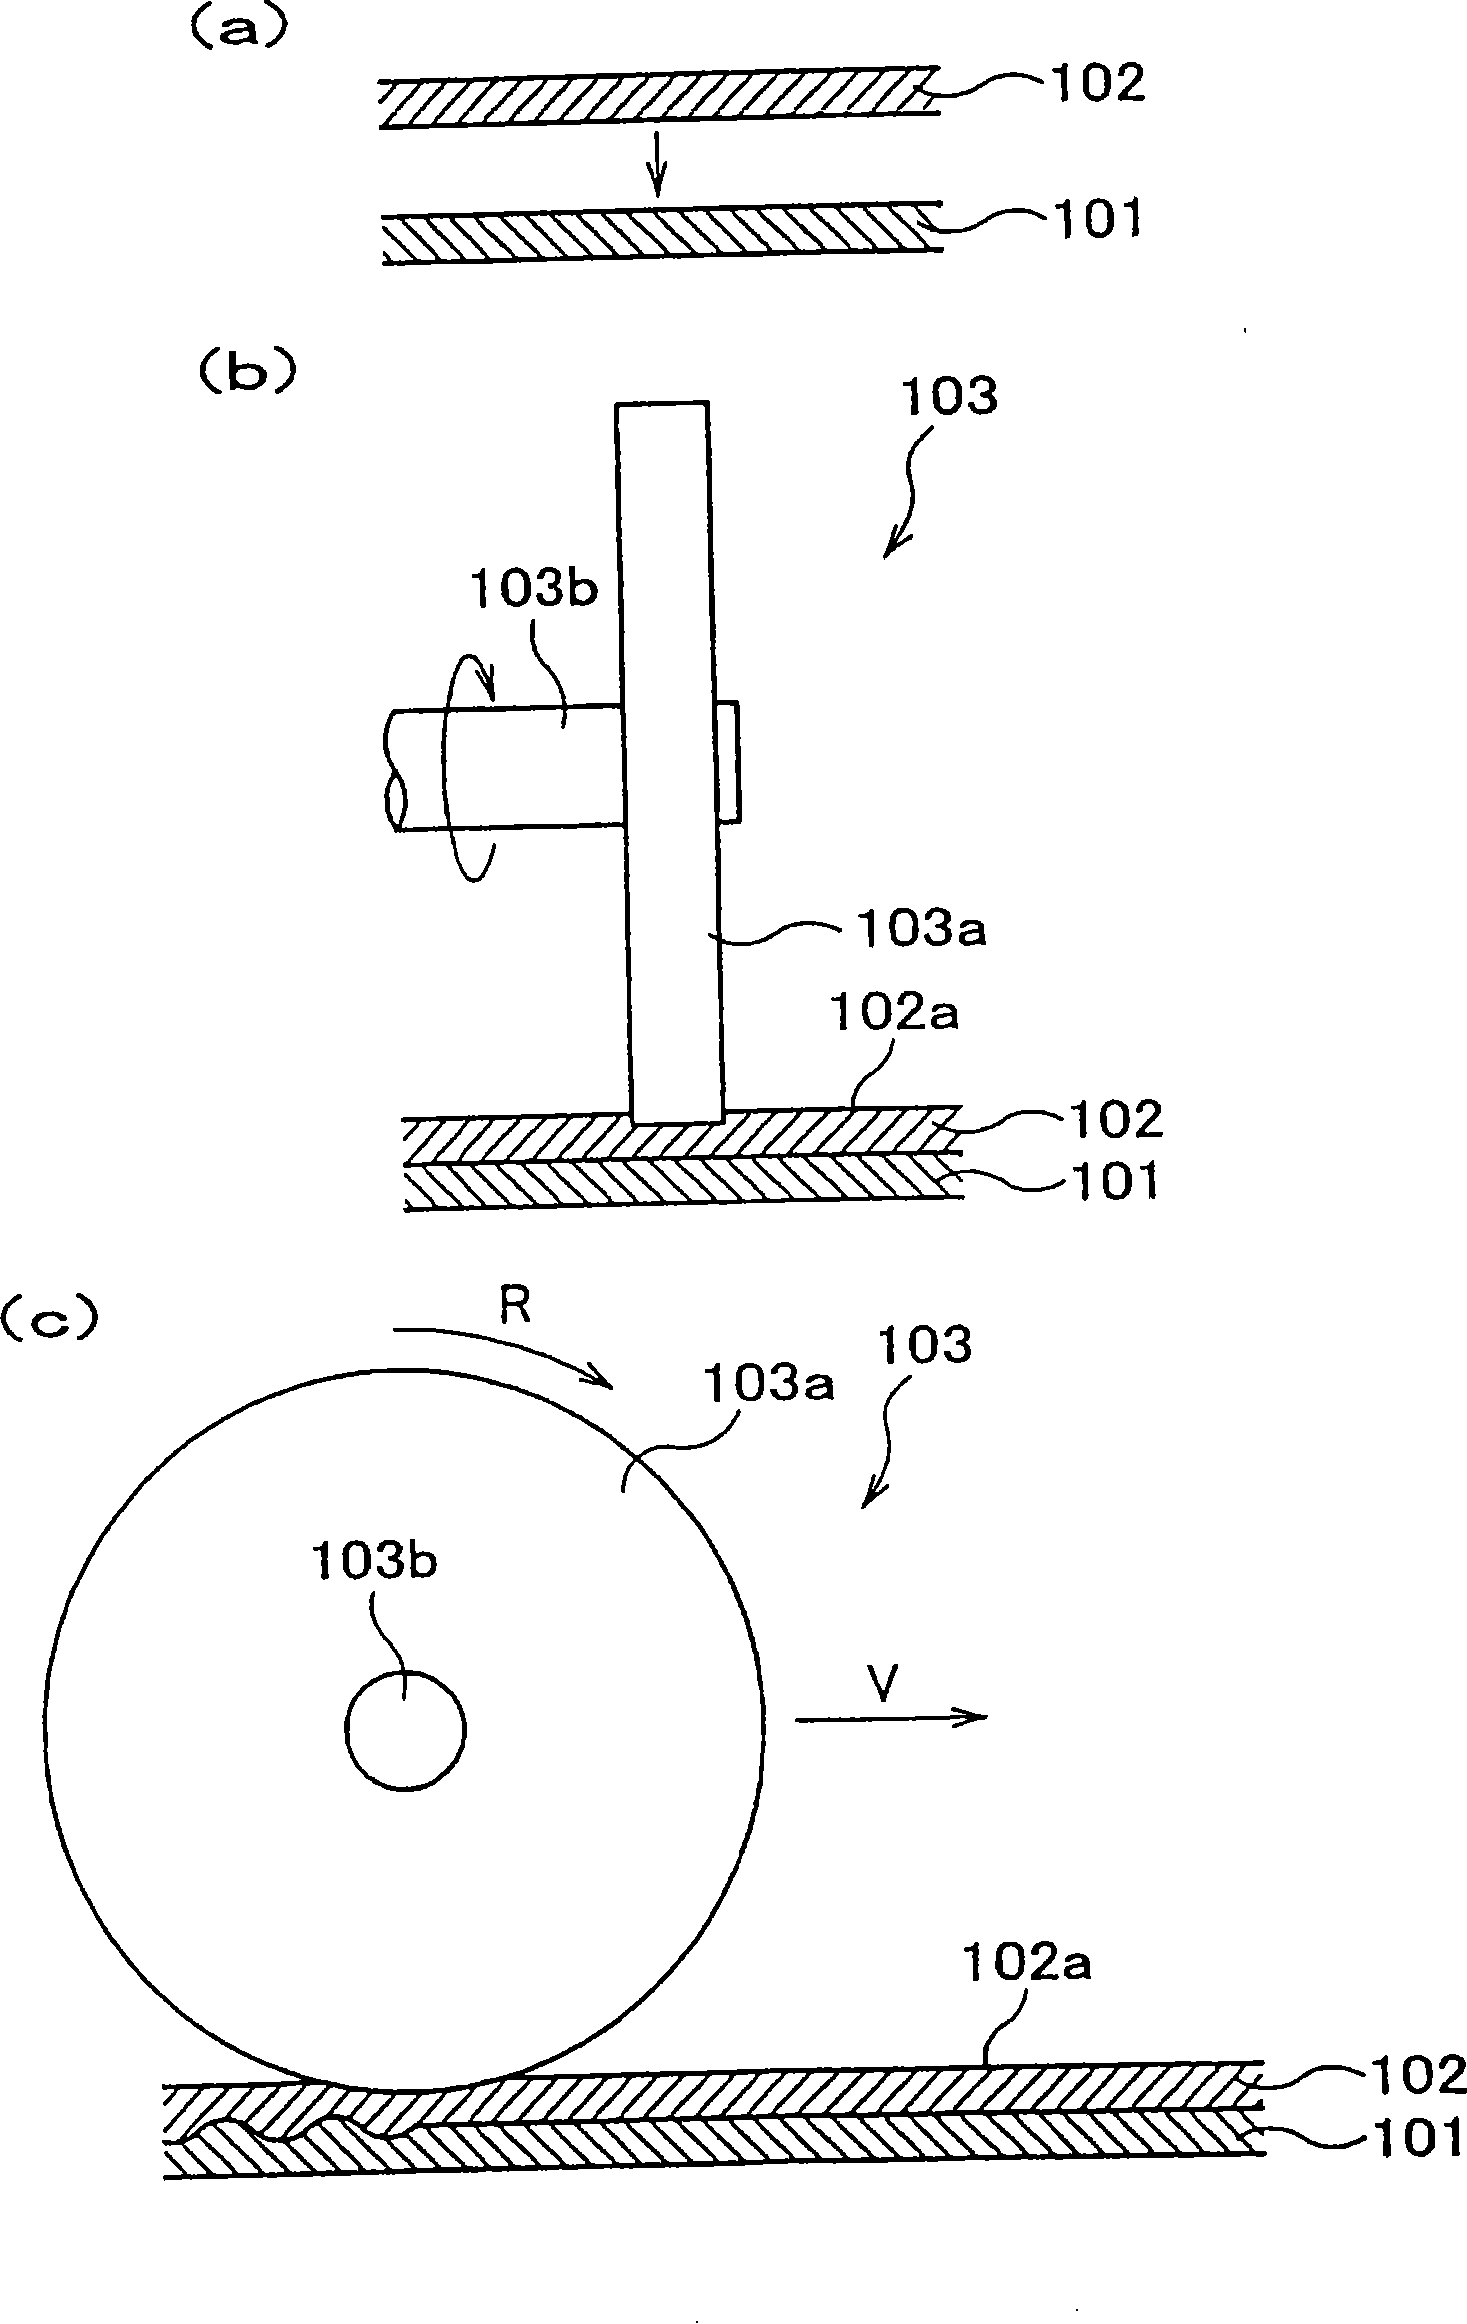 Method of joining metallic members and process for manufacturing radiation member